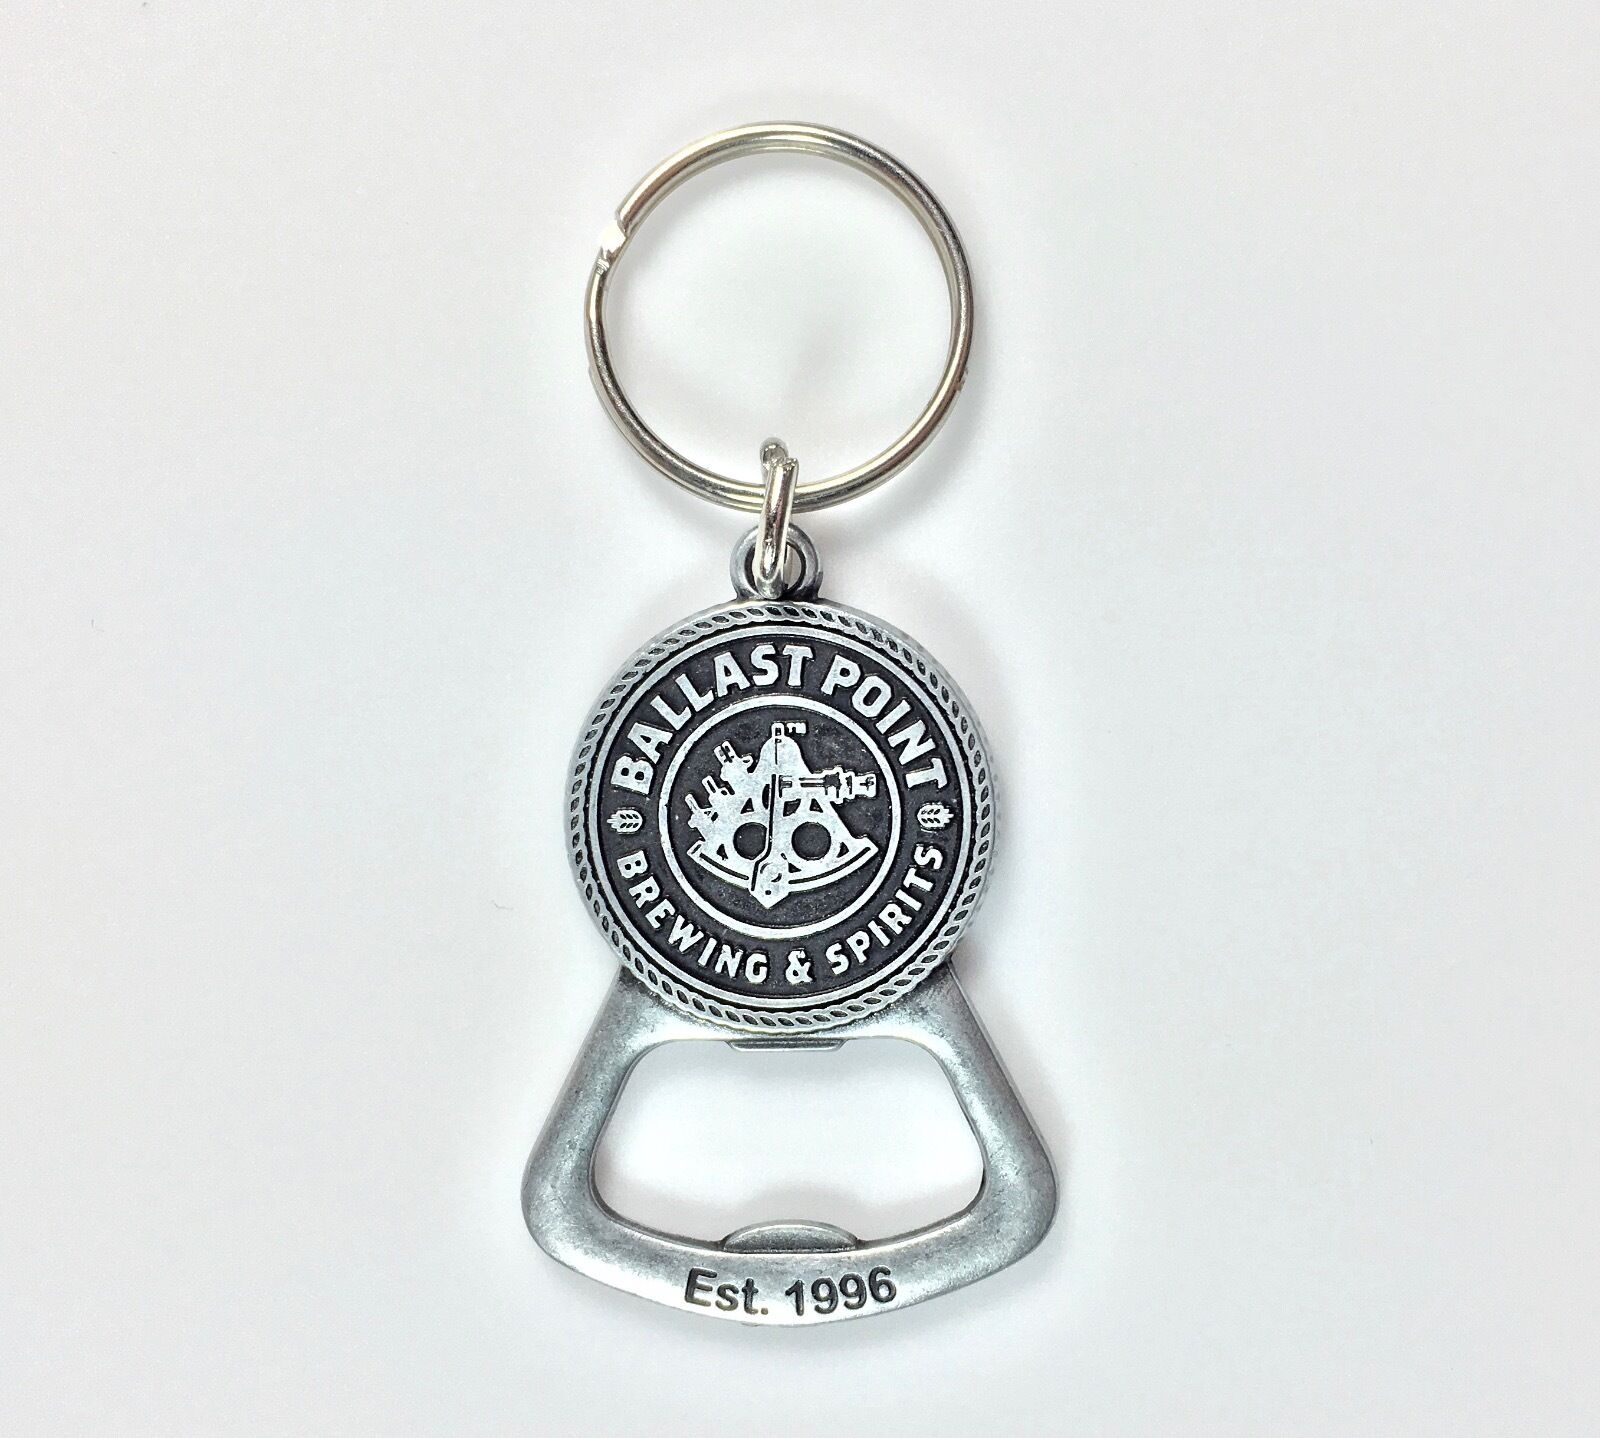 Ballast Point Sextant Key Chain Bottle Opener Brewery Brewing